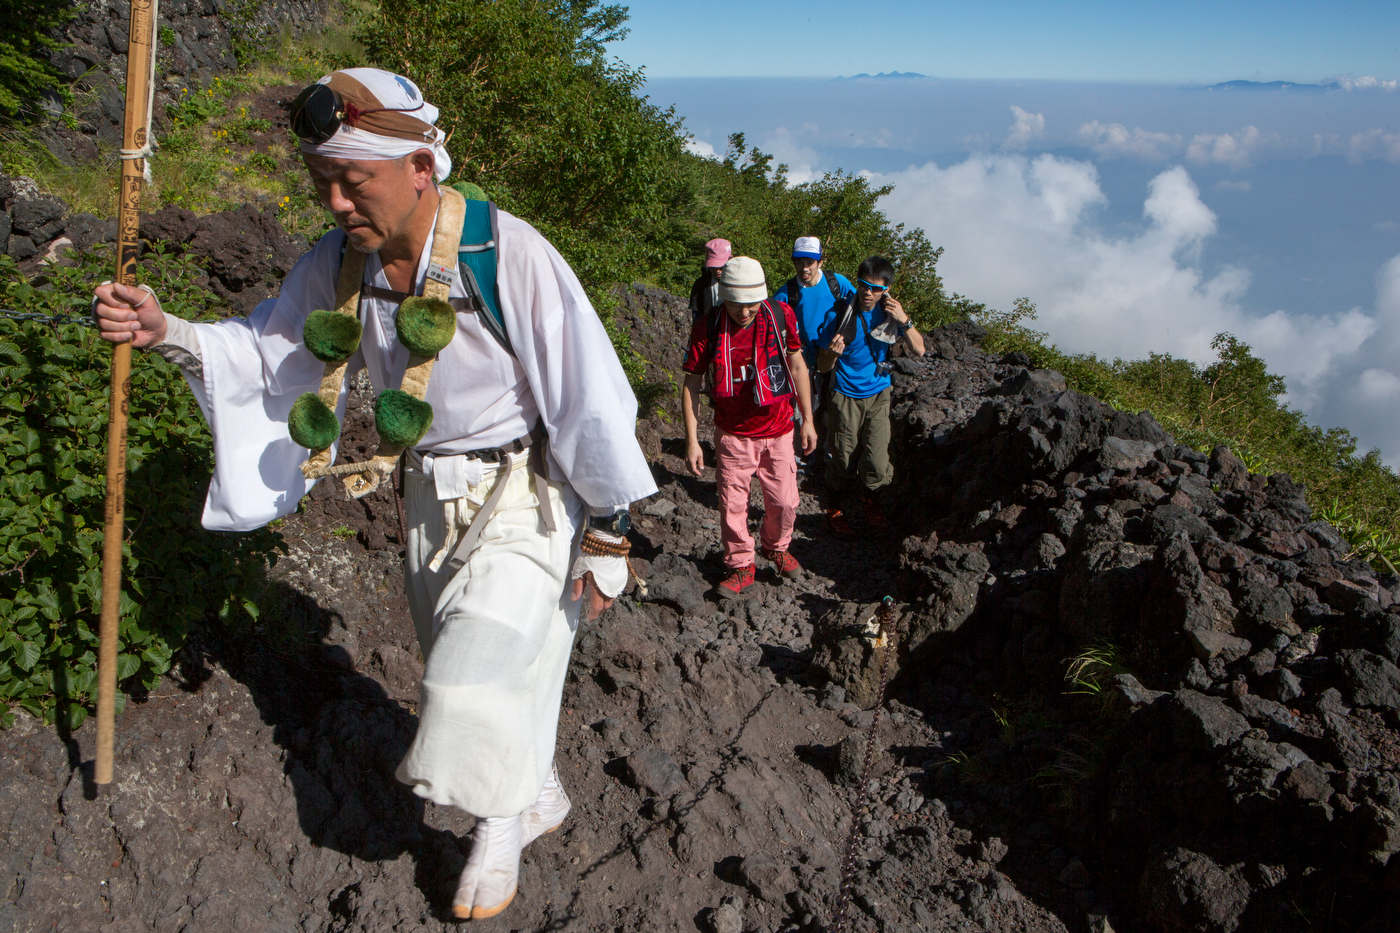 A traditionally dressed hiker on the Yoshida trail, Mount Fuji's most popular route.